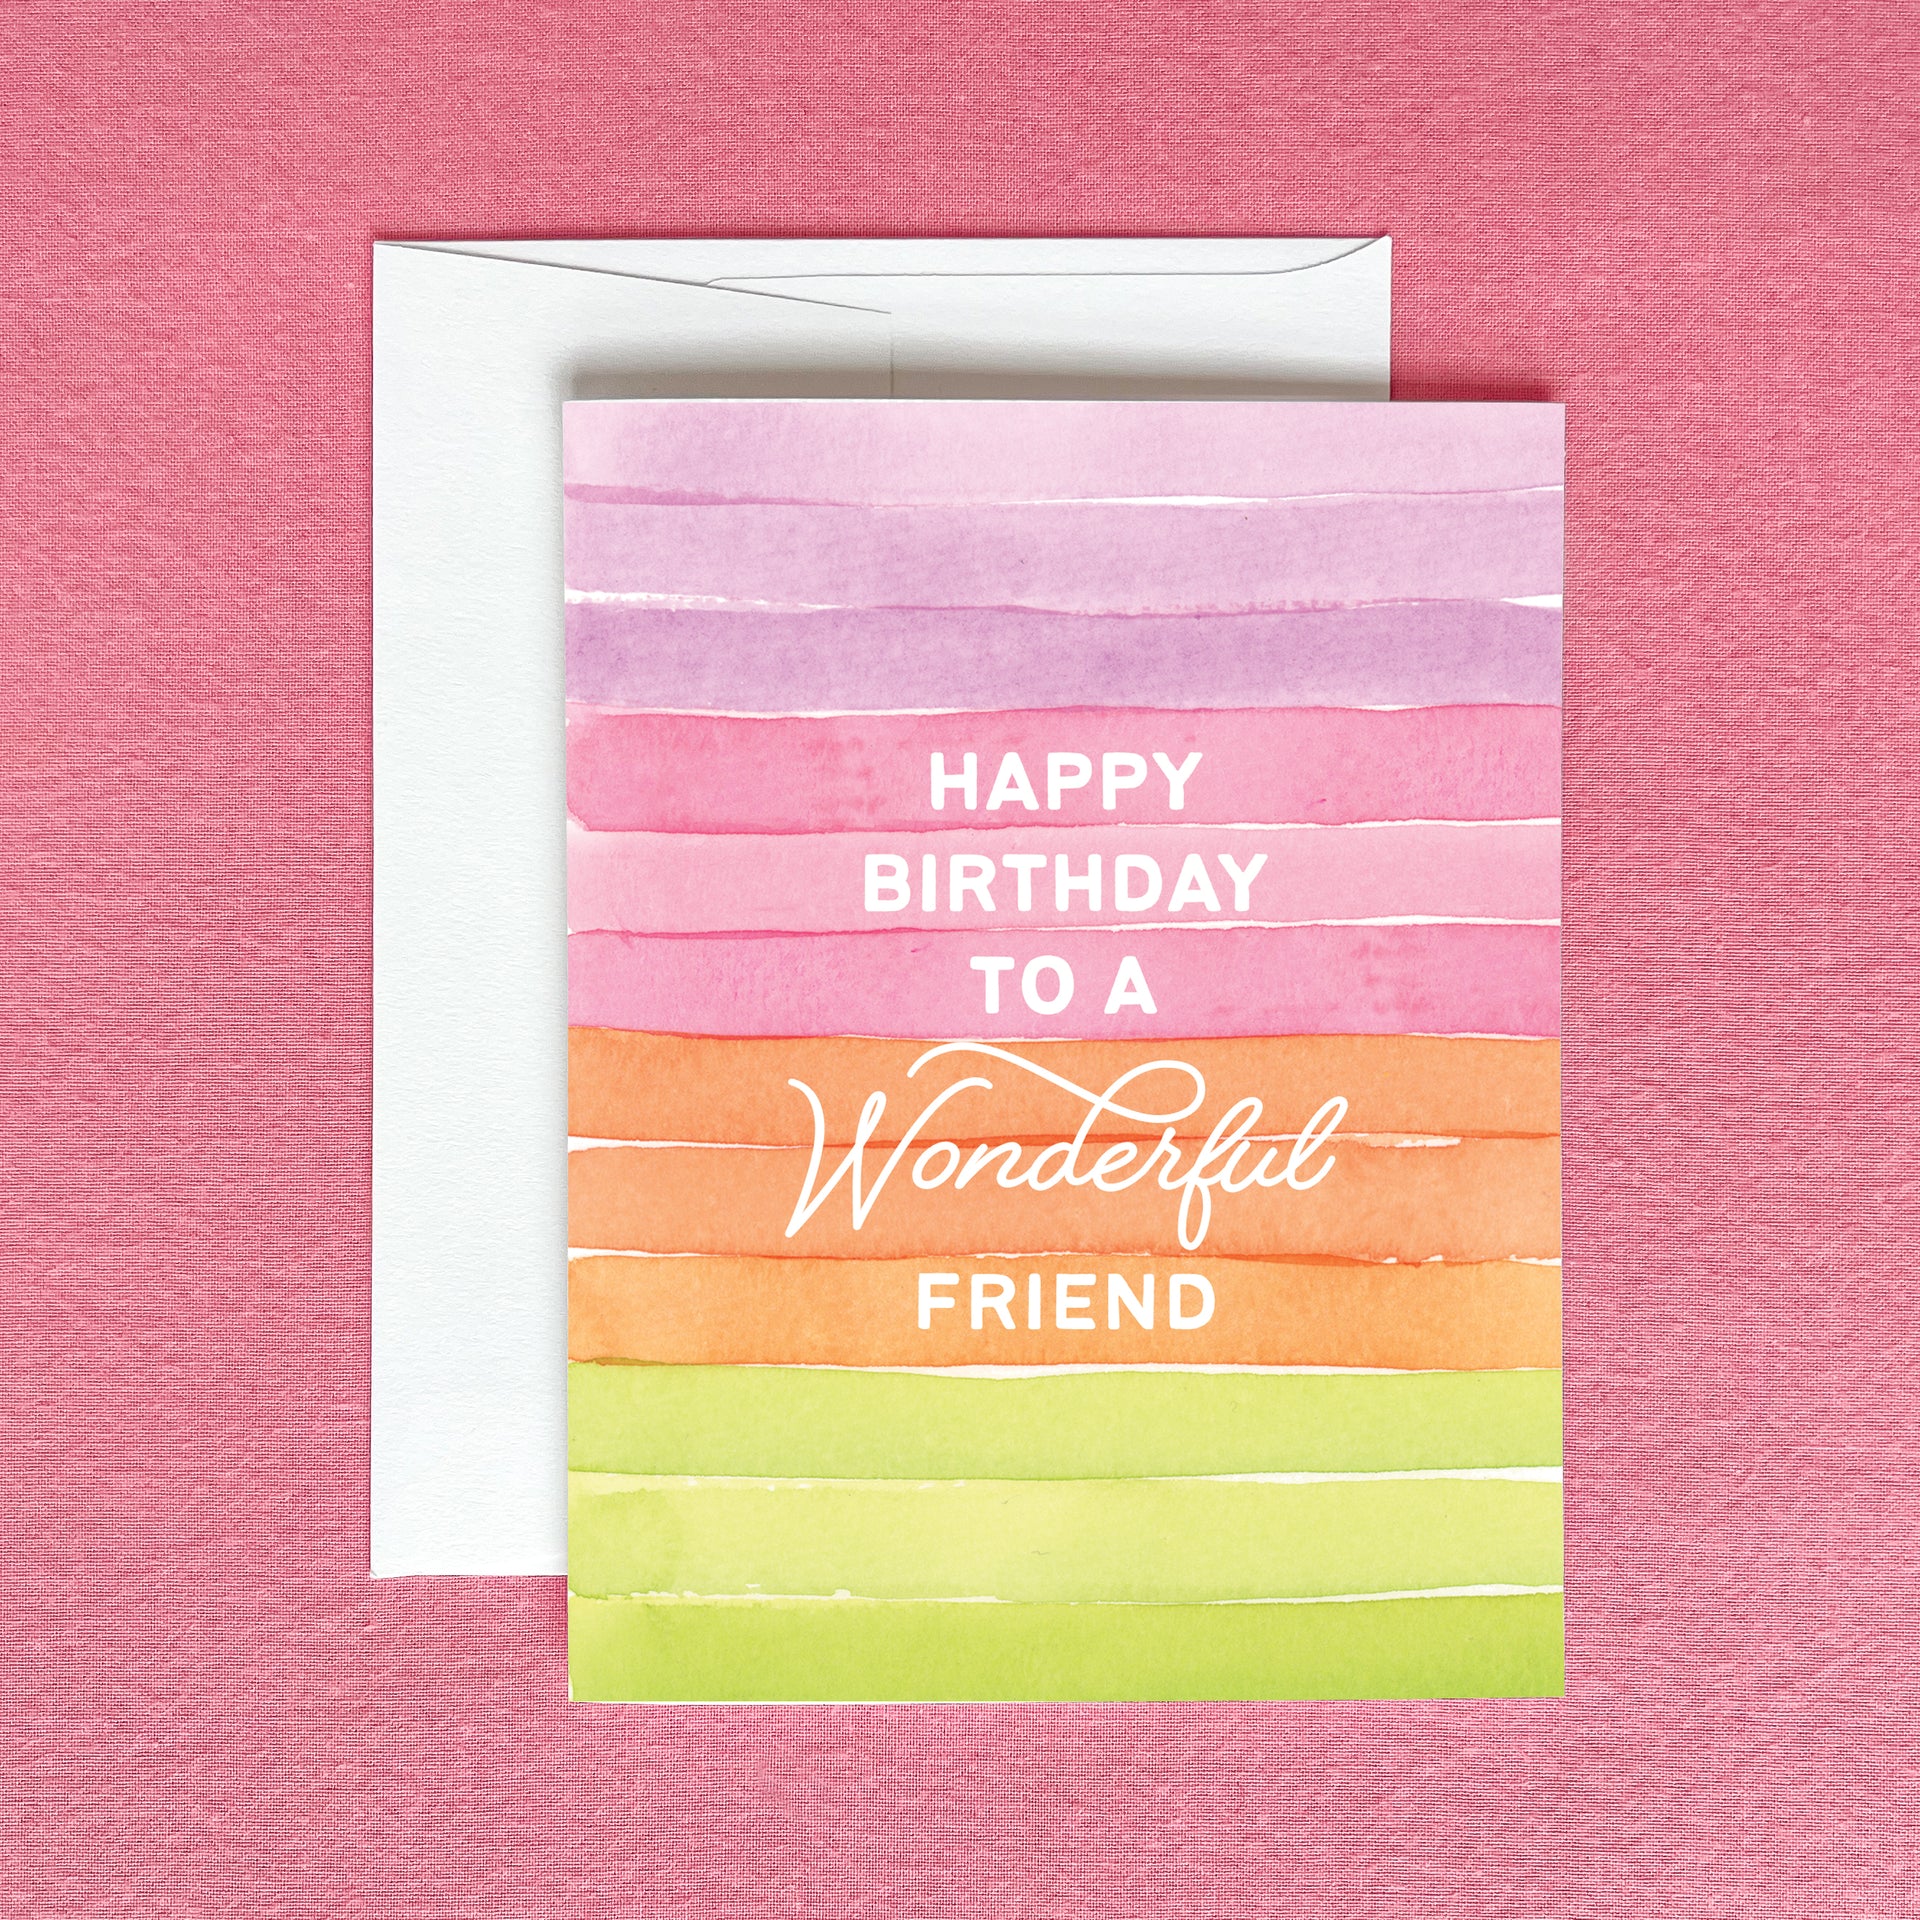 Happy Birthday to a Wonderful Friend Greeting Card by Gert & Co